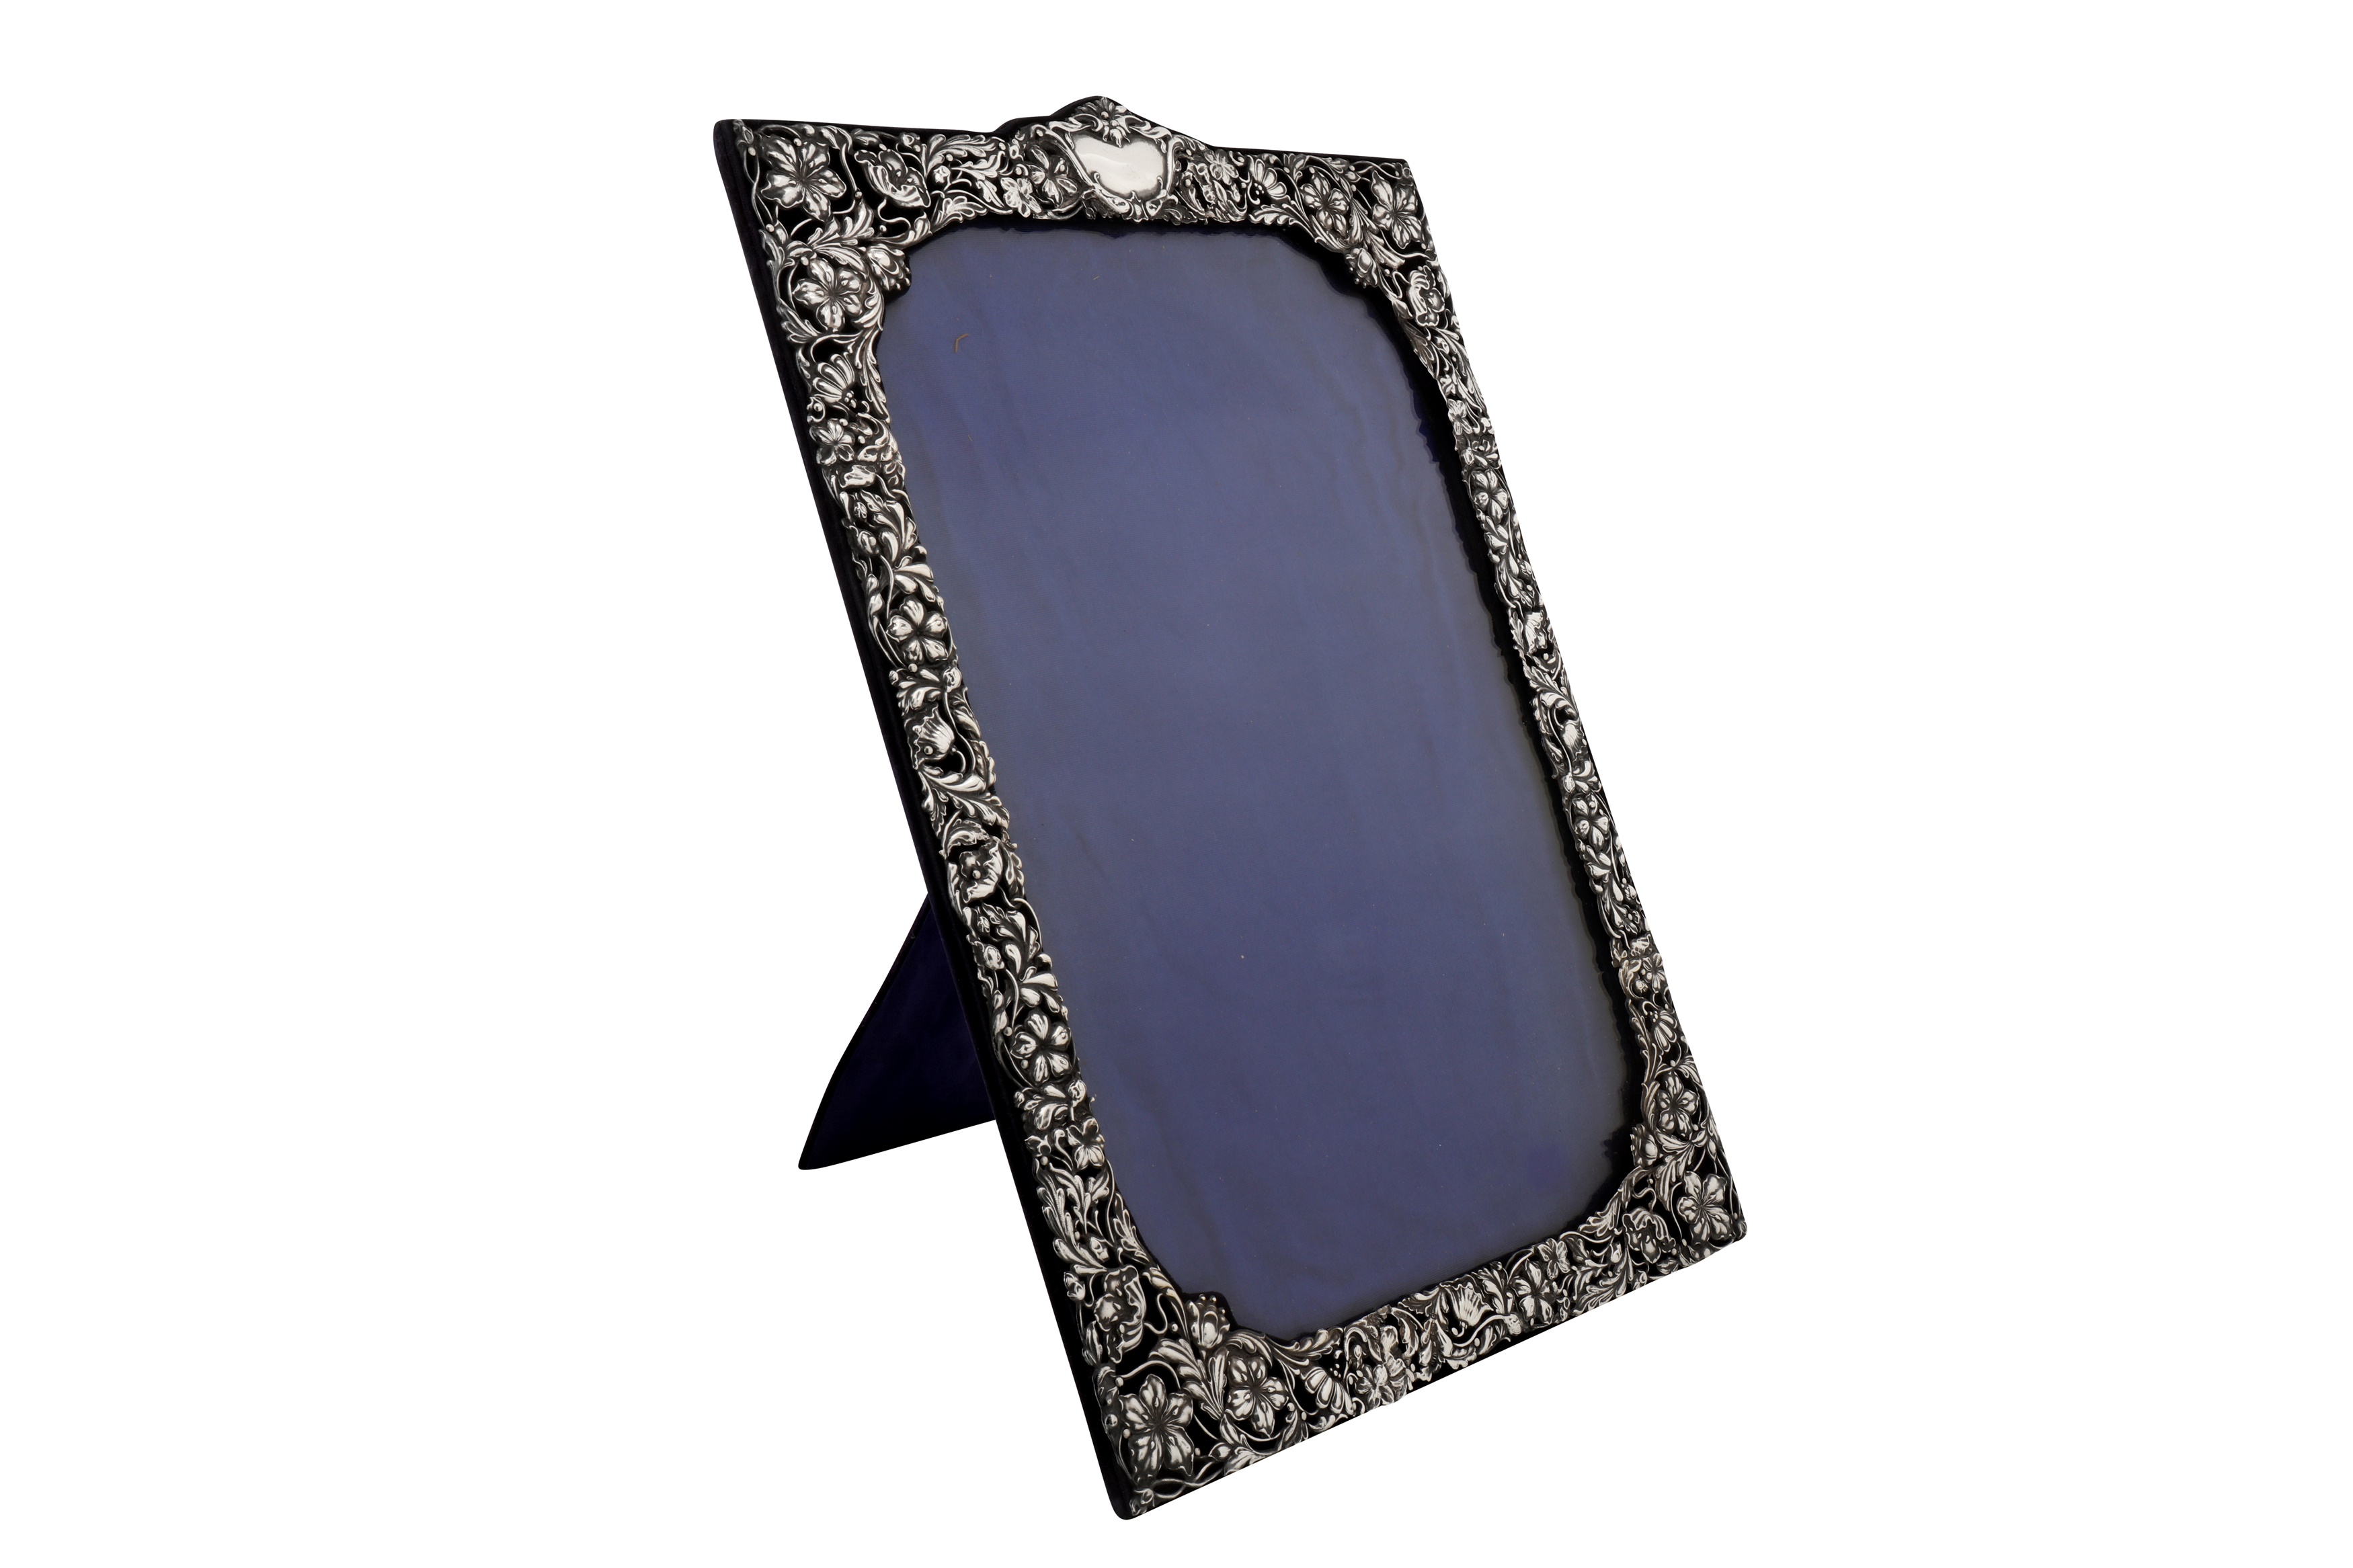 An Edwardian sterling silver photograph or mirror frame, Birmingham 1902 by Henry Matthews - Image 2 of 5